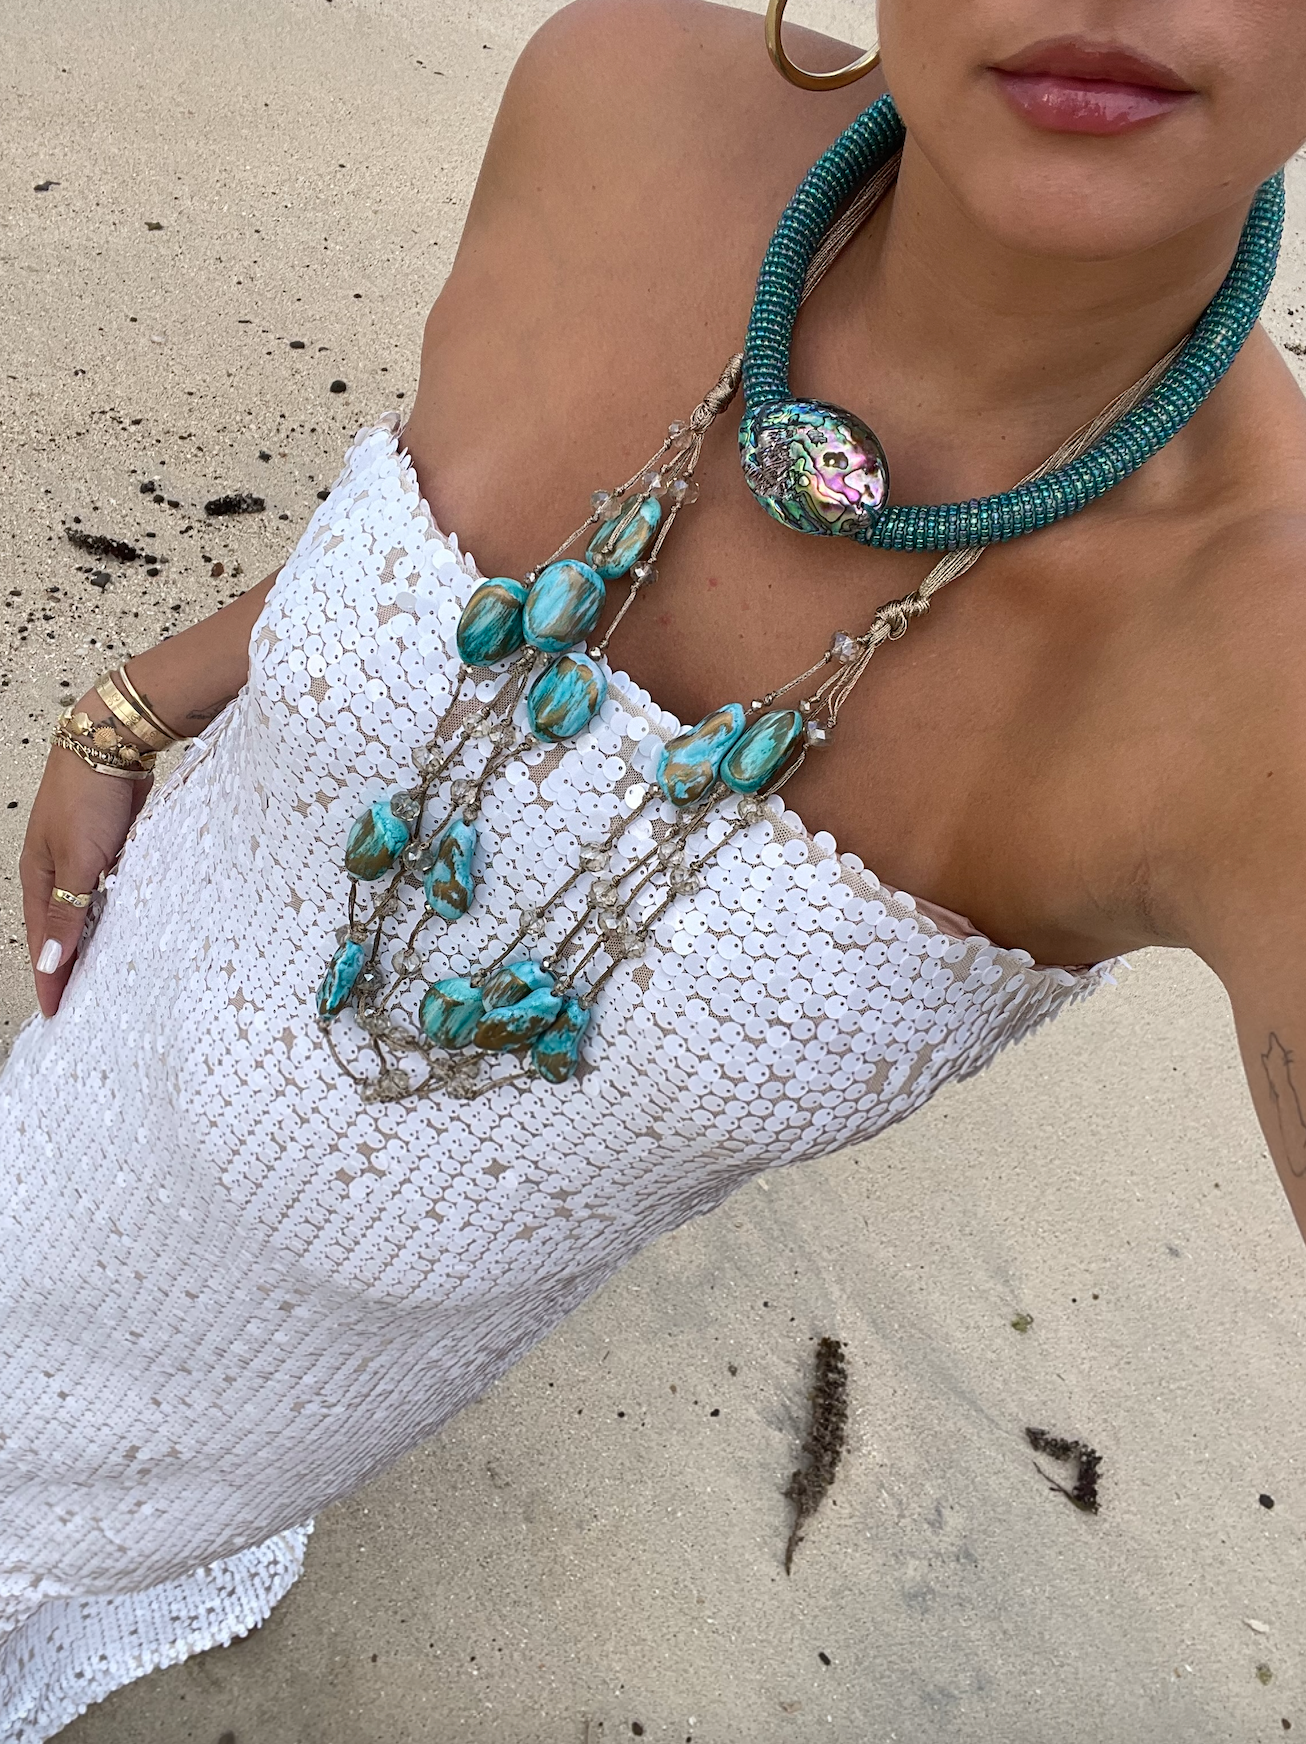 The Iridescent Turquoise Dreams Abalone Necklace